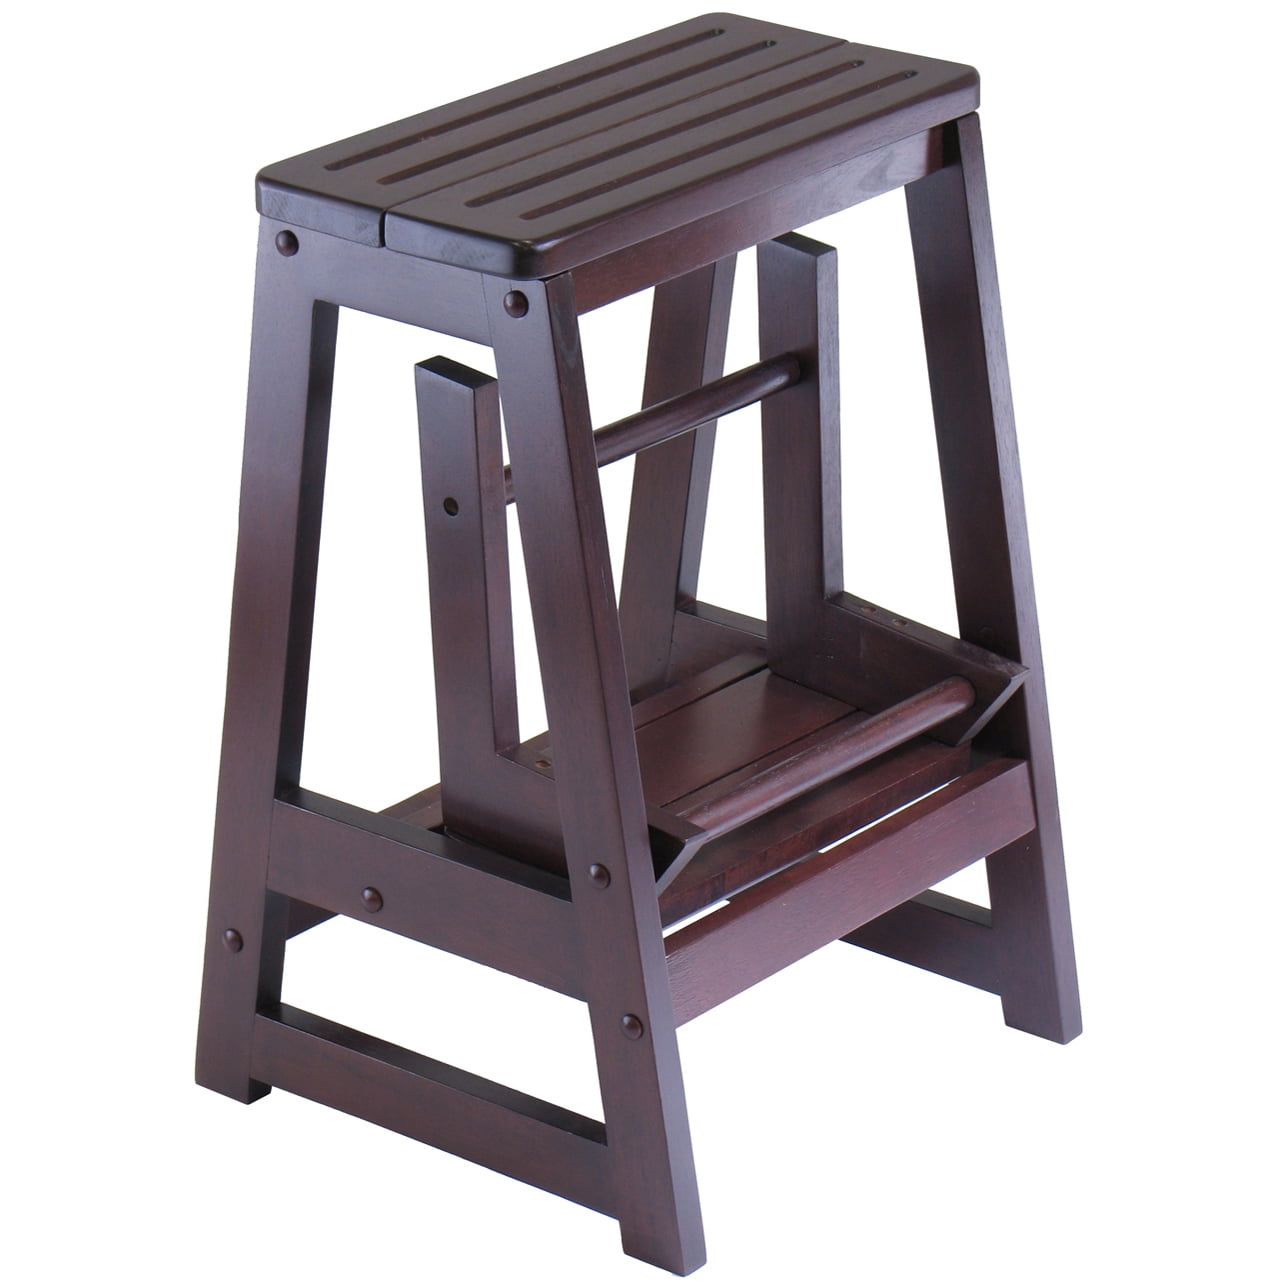 Winsome Home Indoor Living Room Double Step Stool 18.5 L x 15 W x 21.5 H Finished in an Antique Walnut Hue For an Elegant Look 